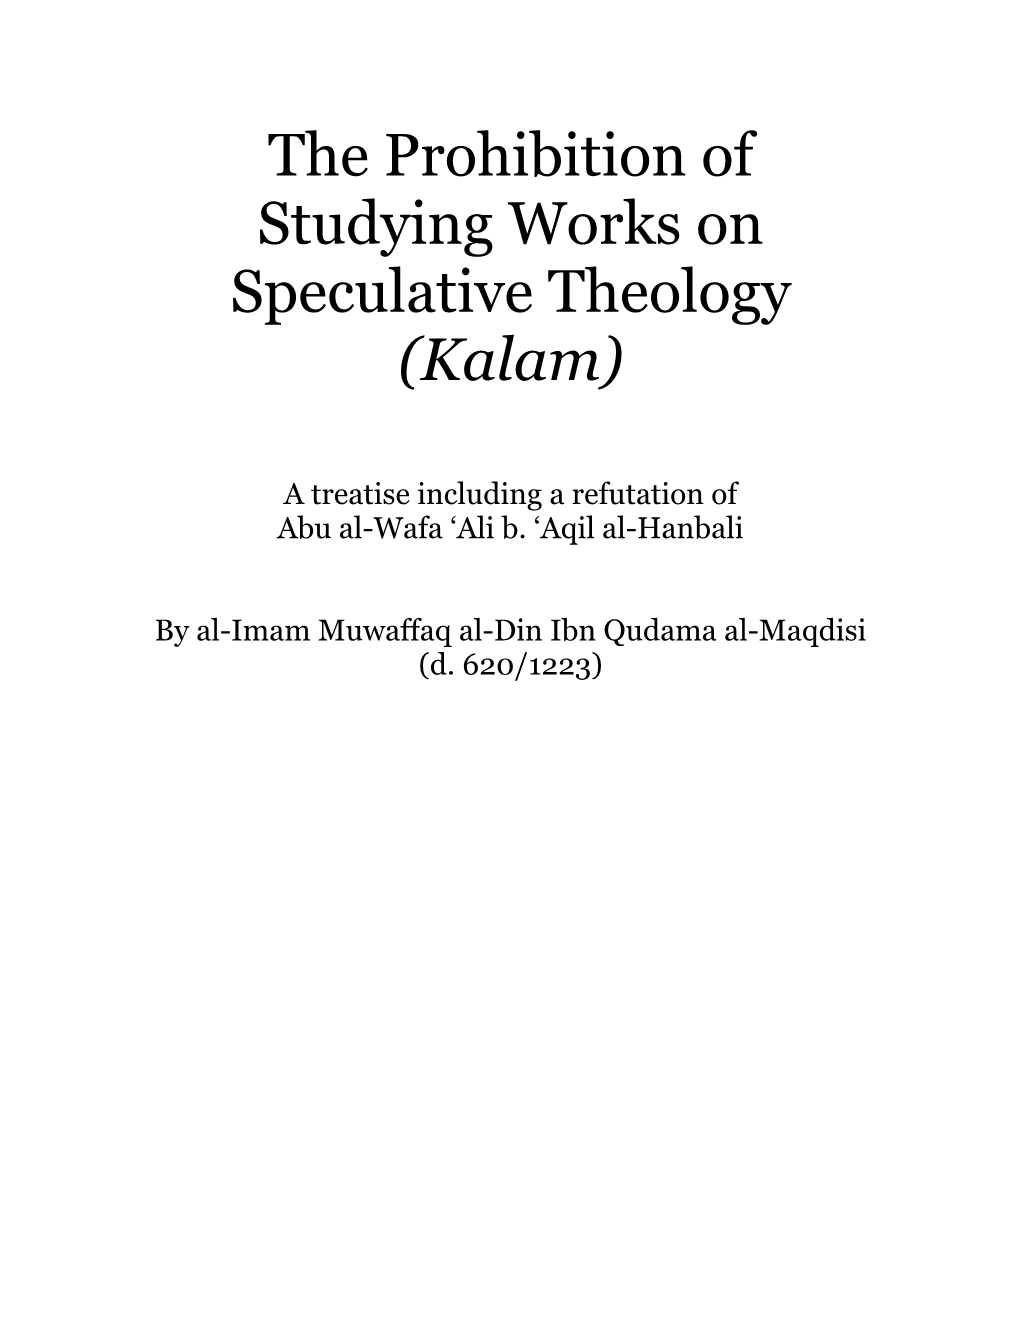 The Prohibition of Studying Works on Speculative Theology (Kalam)